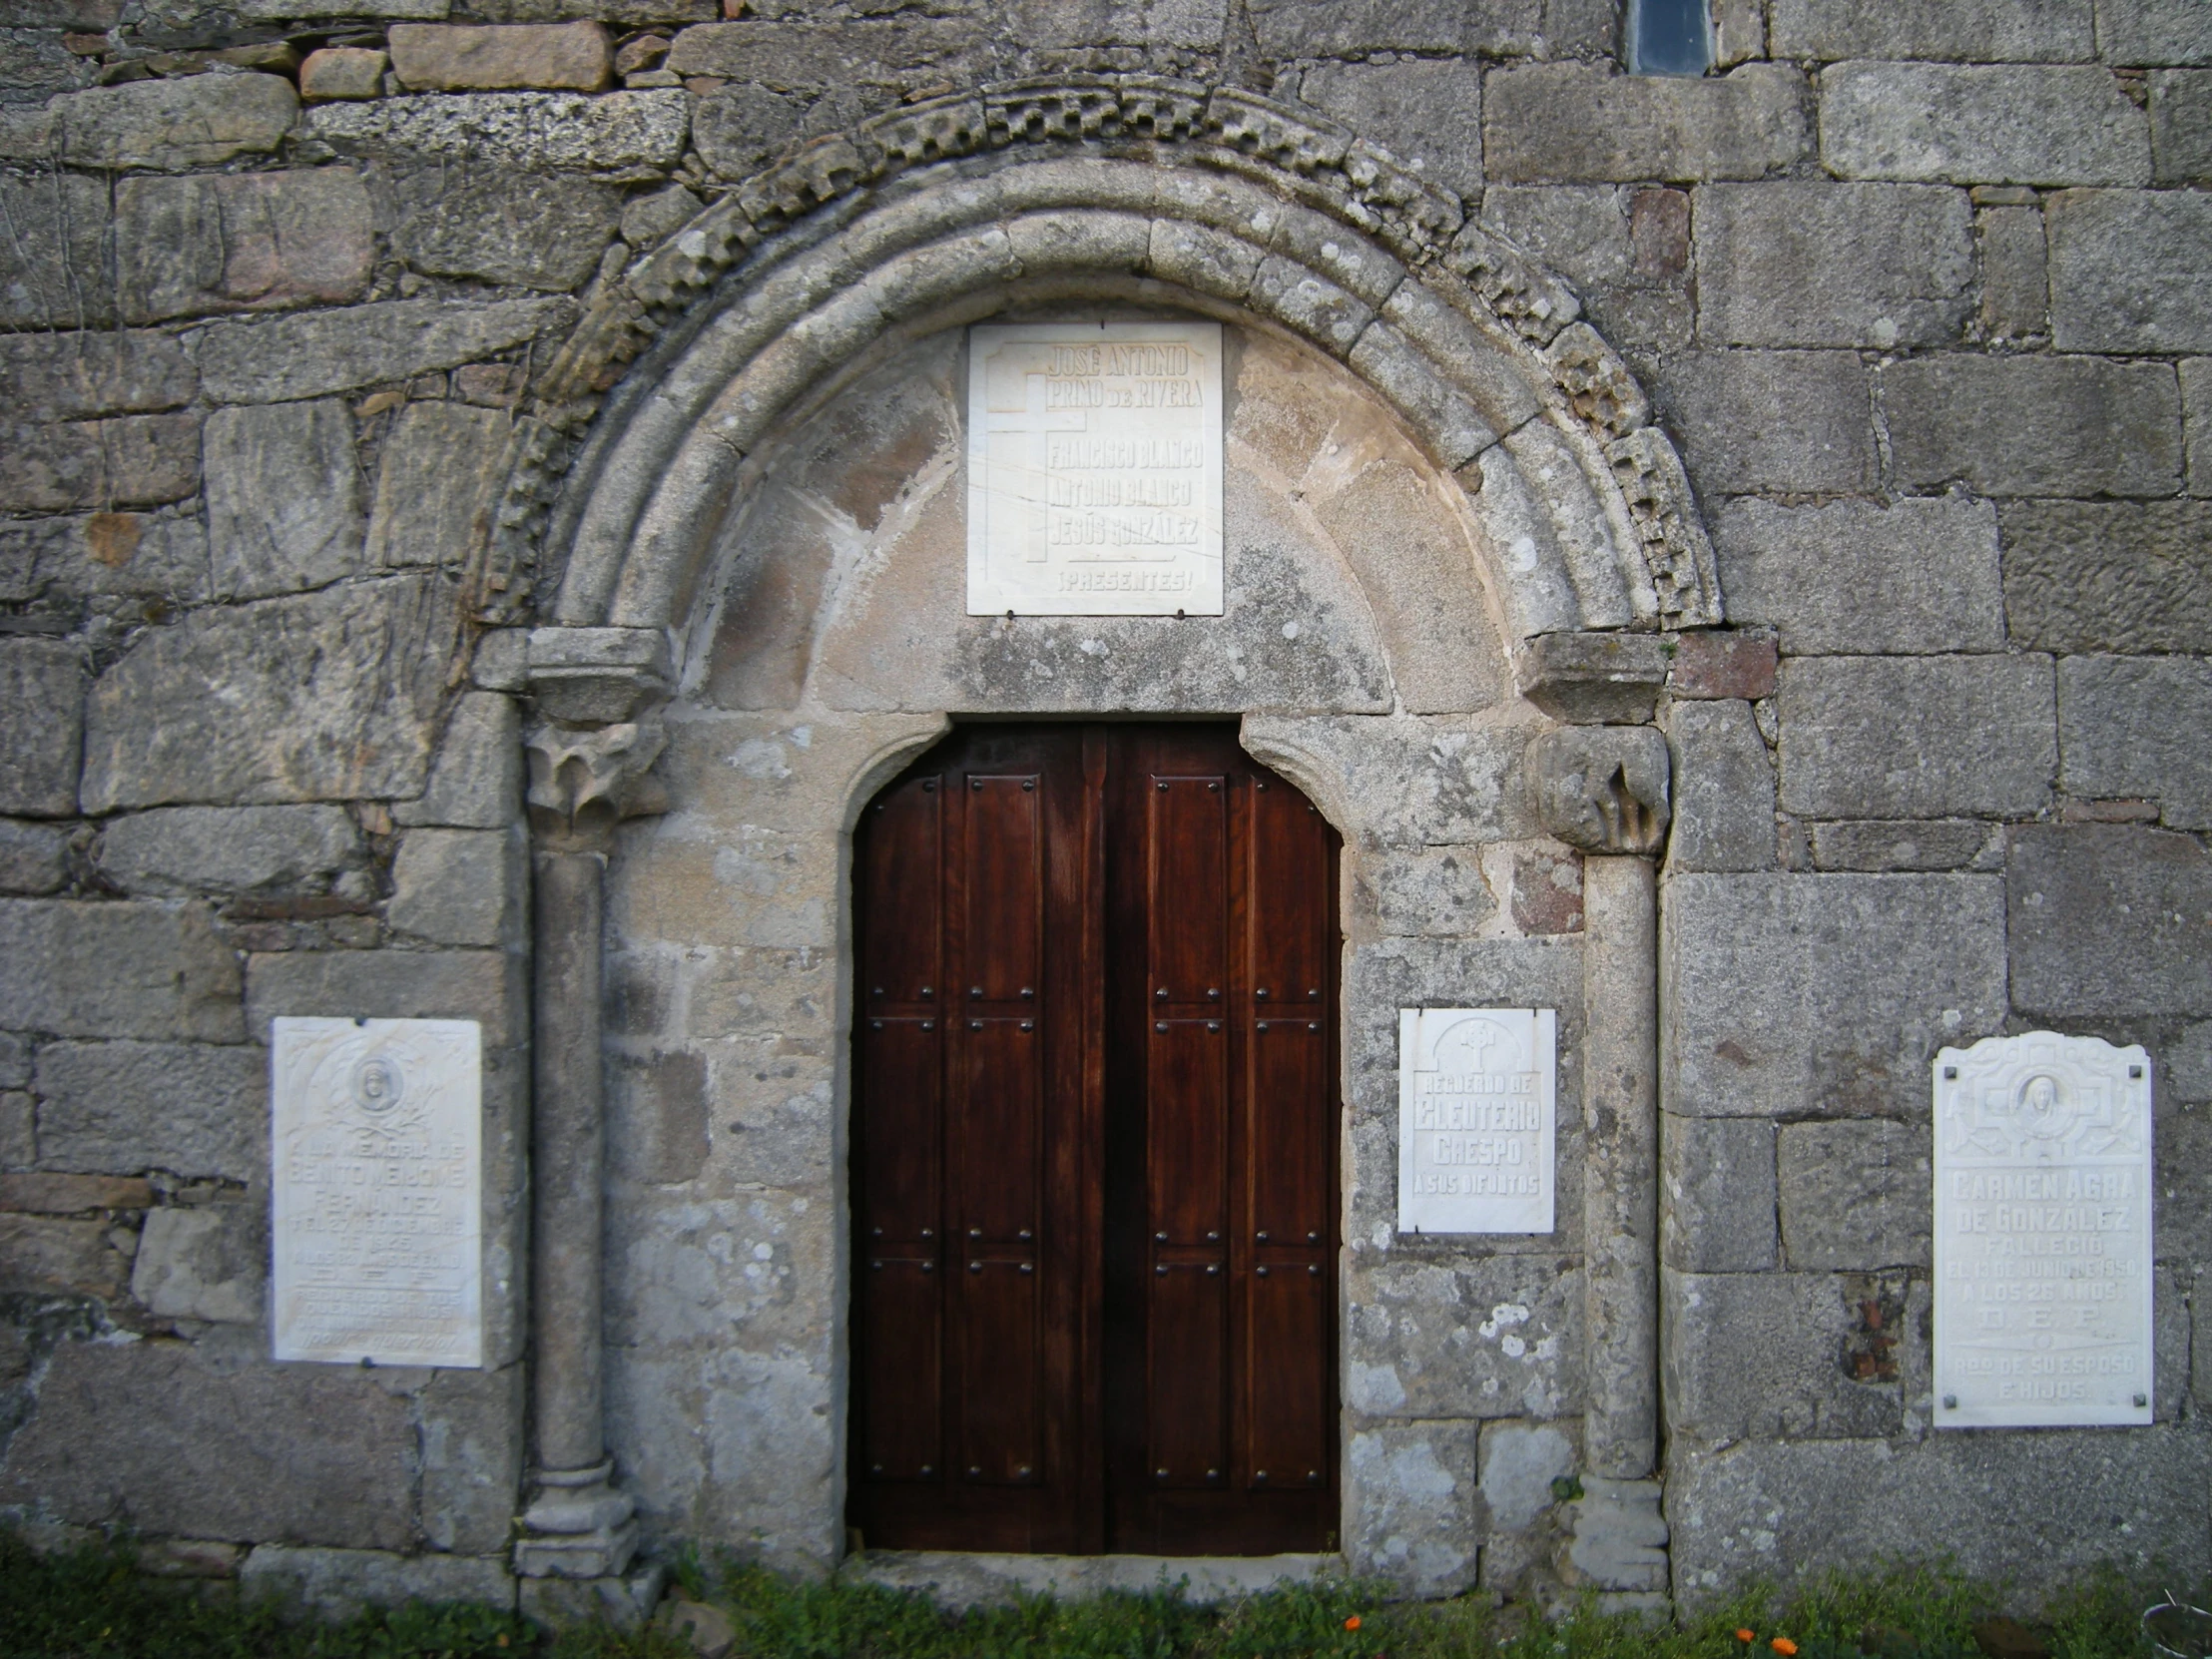 two doors are shown at the top of an old building